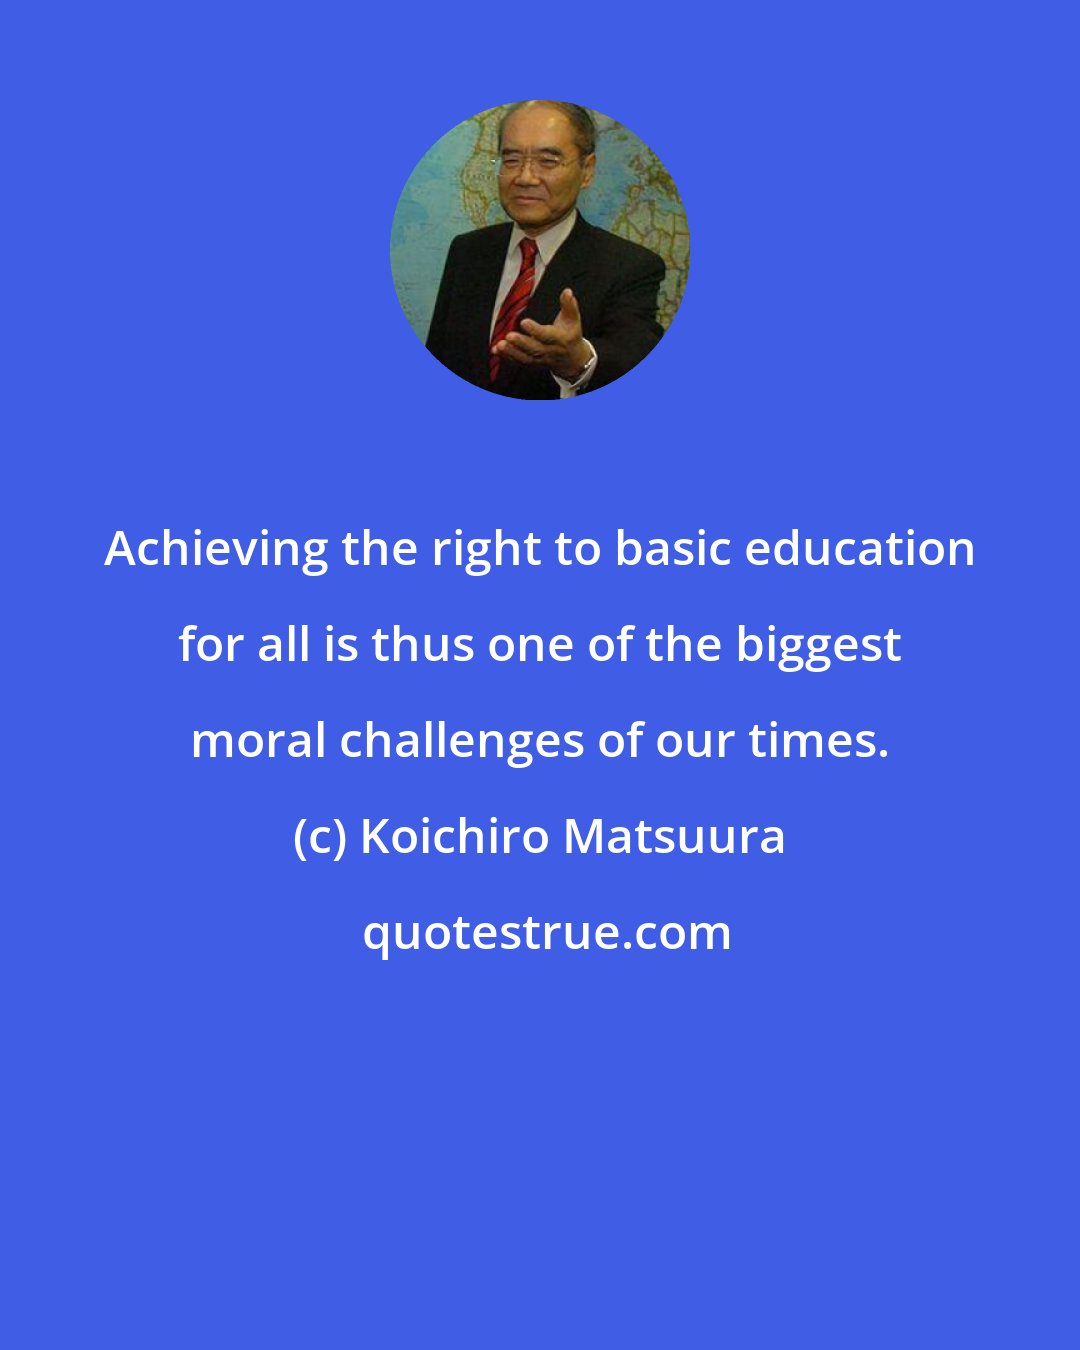 Koichiro Matsuura: Achieving the right to basic education for all is thus one of the biggest moral challenges of our times.